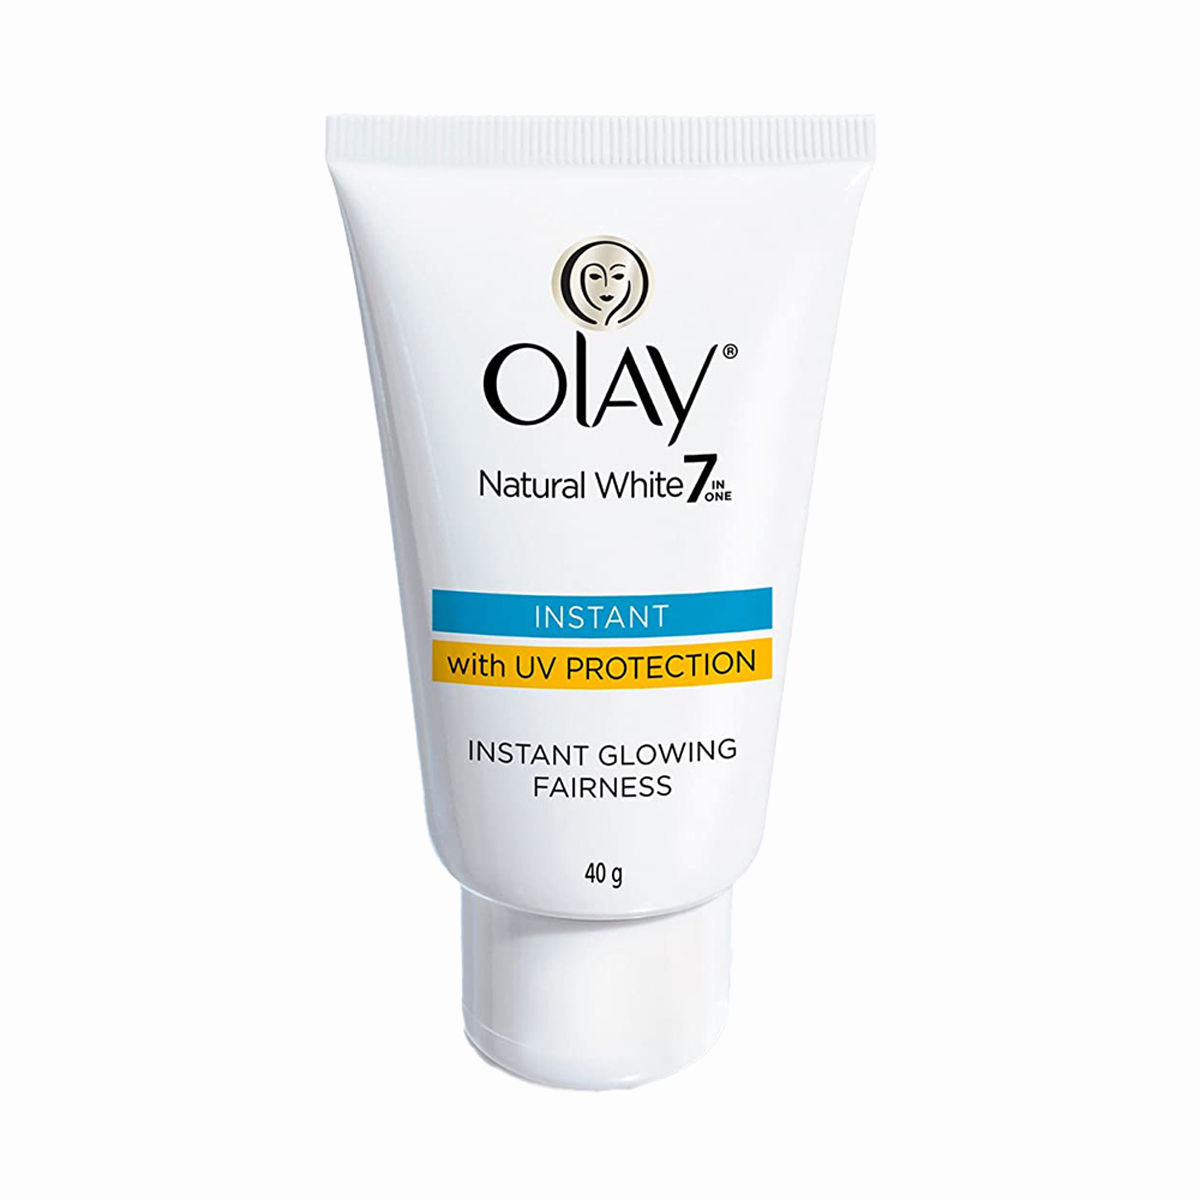 Olay Natural White Instant Glowing Fairness Cream, 40 gm, Pack of 1 